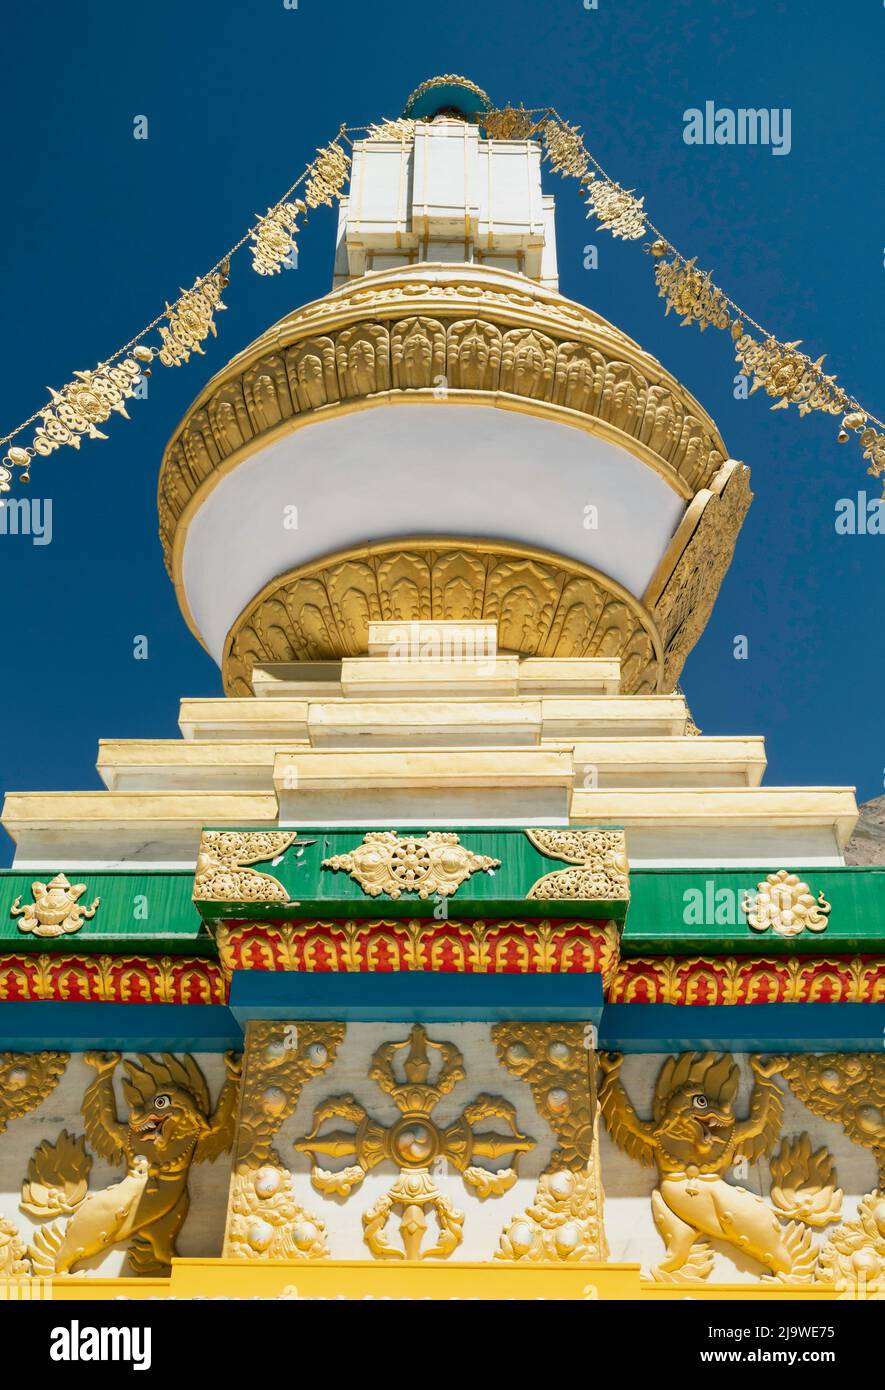 Buddhist stupa decorated in beautiful colours situated inside the gounds of the ancient monastery under blue sky in Tabo, Himachal Pradesh, India. Stock Photo